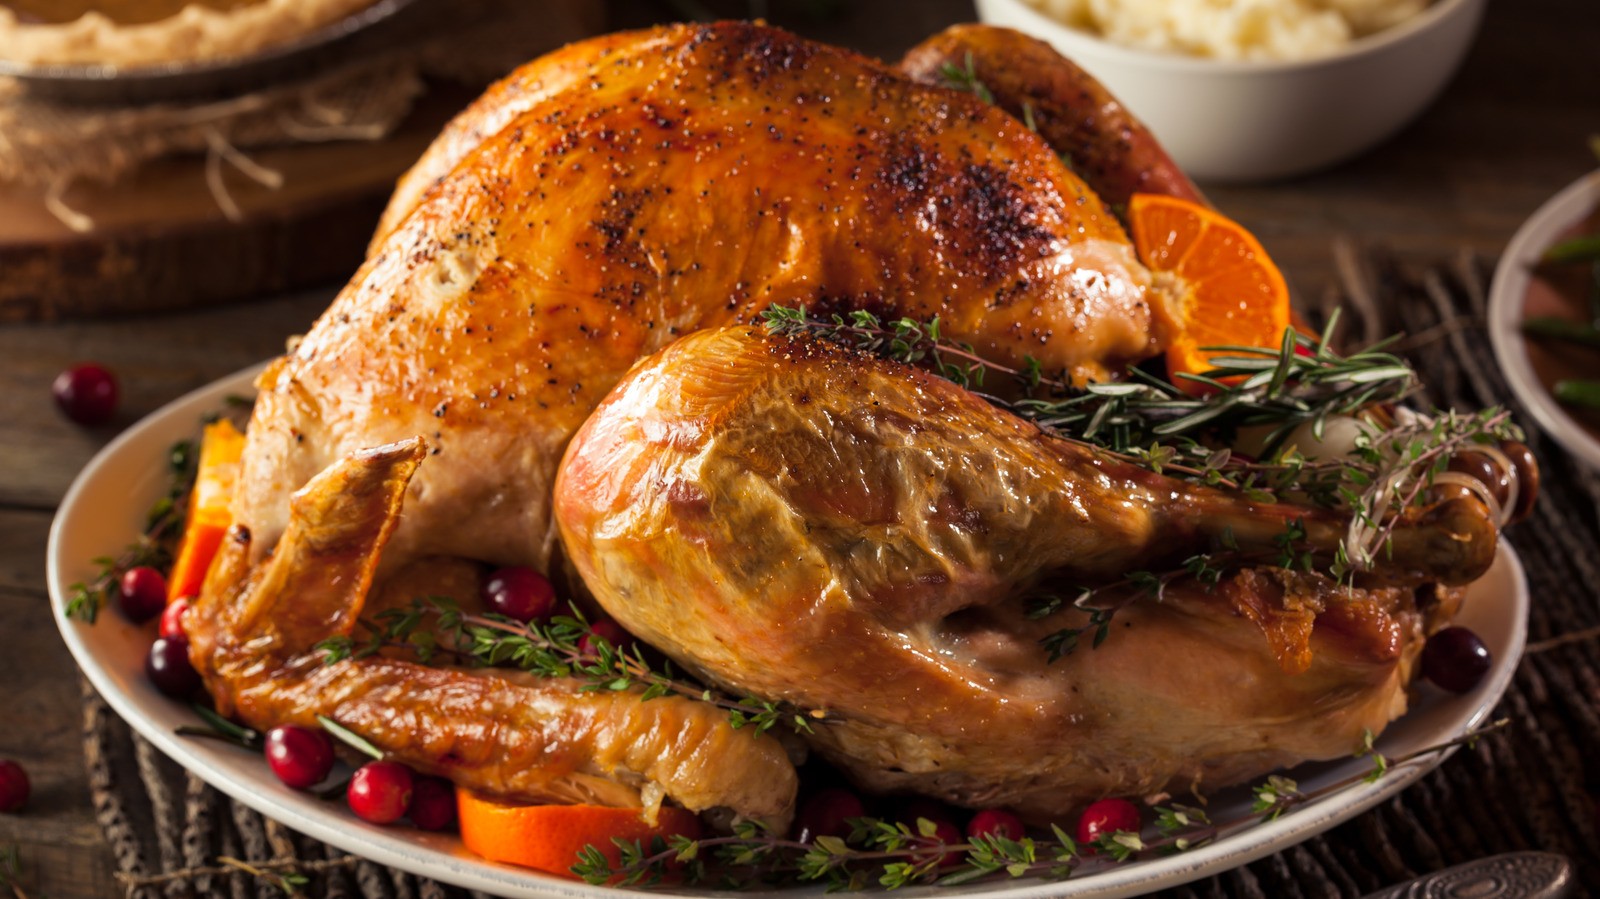 You Should Rethink The Ways You're Eating Turkey